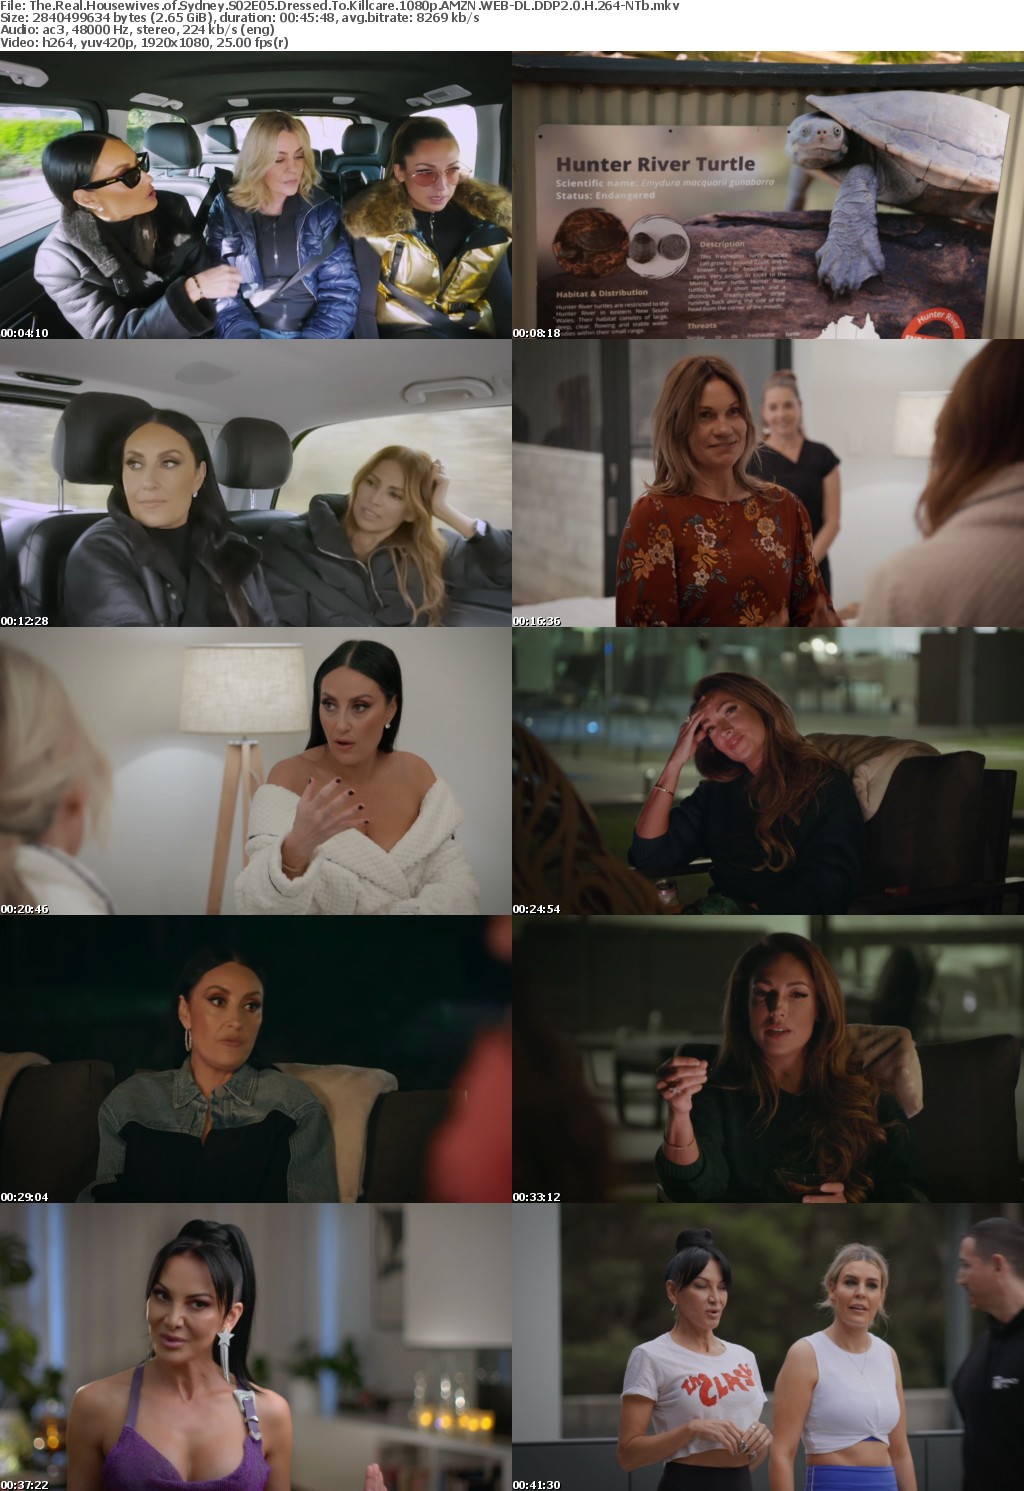 The Real Housewives of Sydney S02E05 Dressed To Killcare 1080p AMZN WEB-DL DDP2 0 H 264-NTb